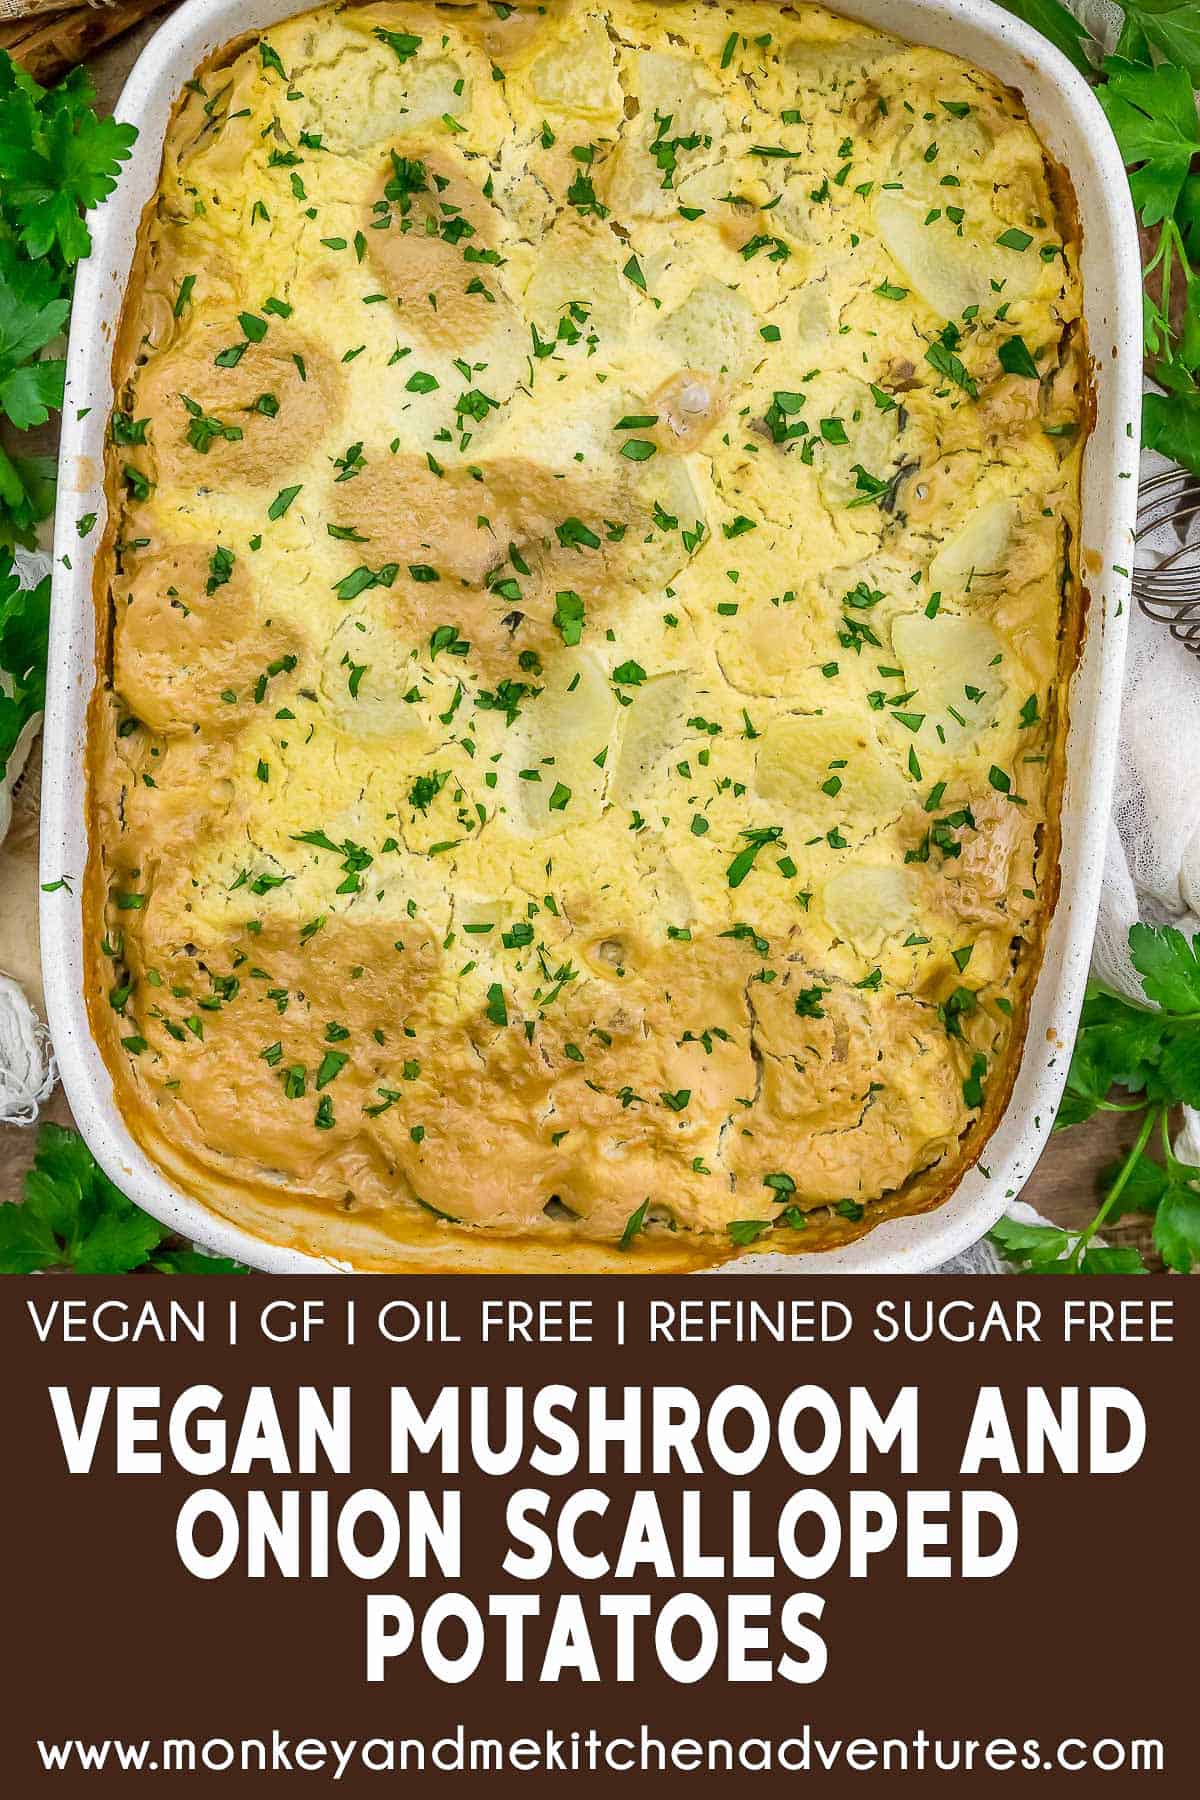 Vegan Mushroom and Onion Scalloped Potatoes with text description